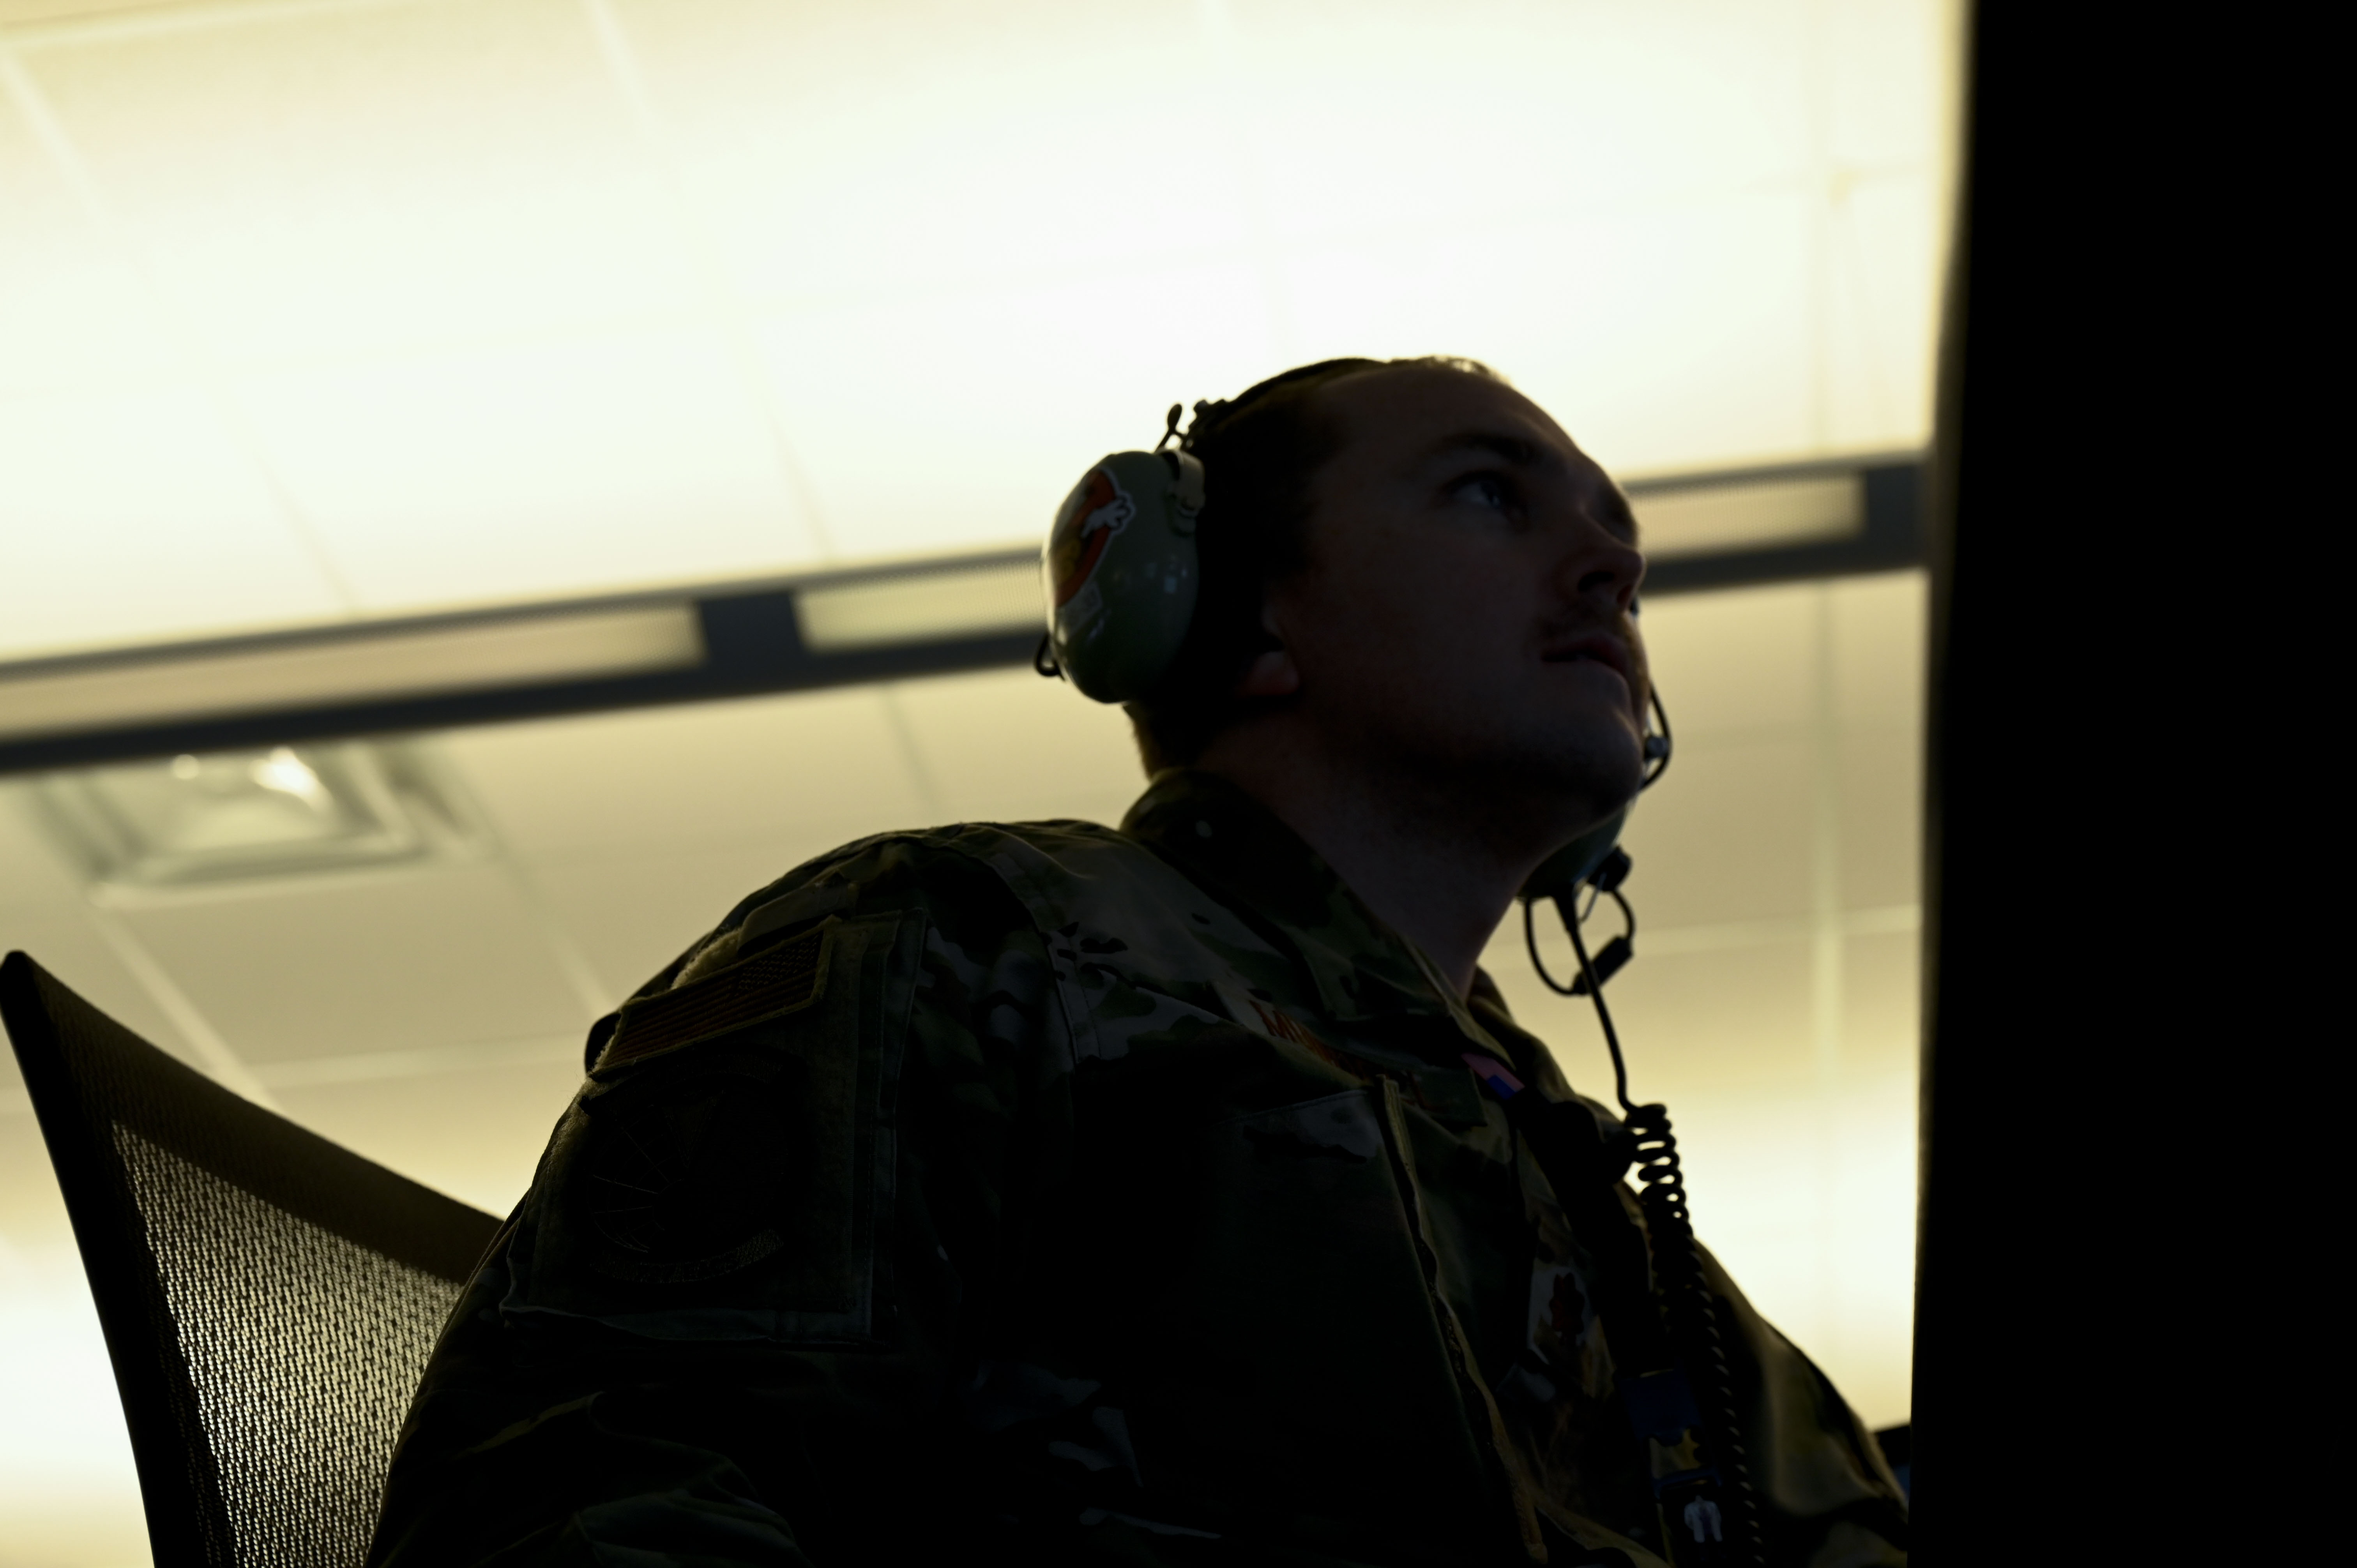 Silhouette of serviceperson